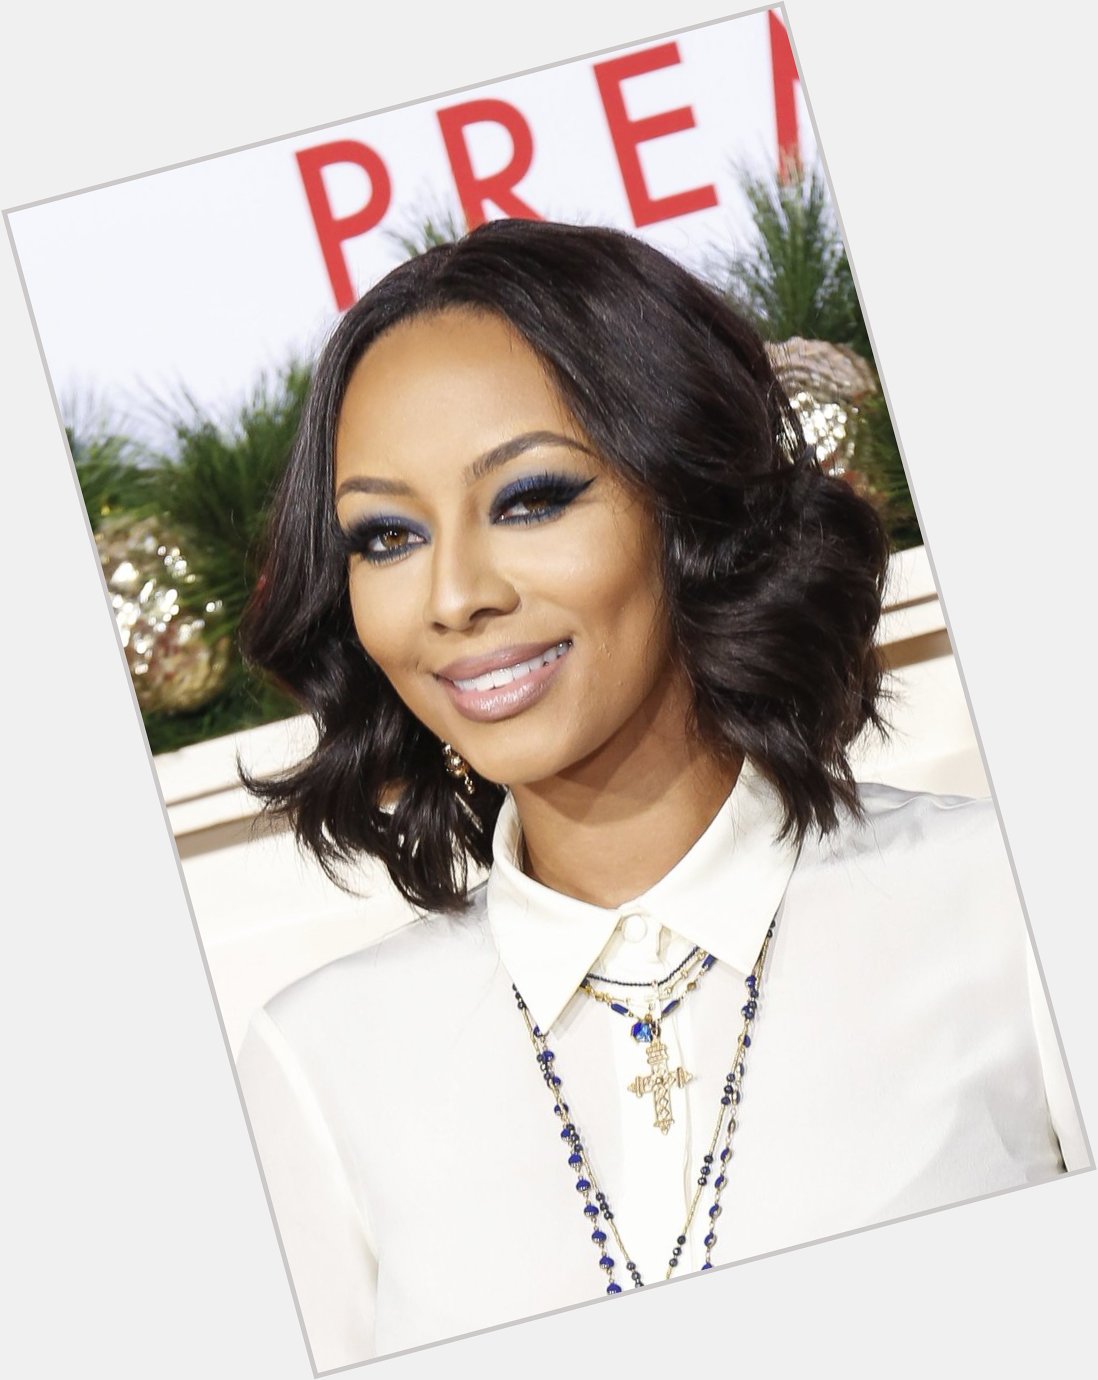 Today we wish American singer and song writer Keri Hilson a happy birthday! 